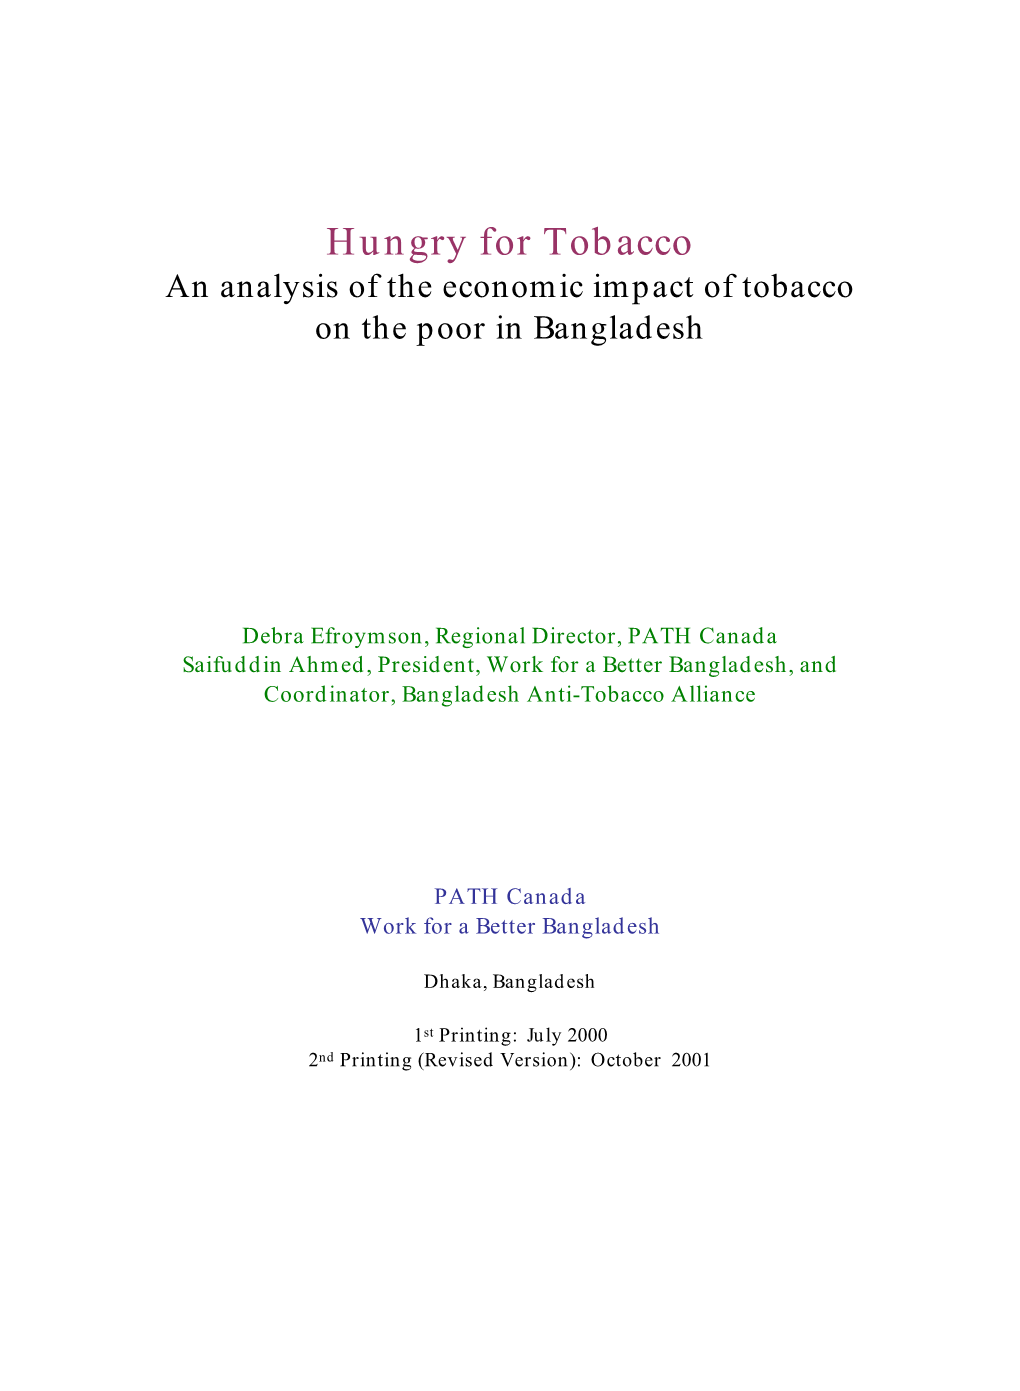 An Analysis of the Economic Impact of Tobacco on the Poor in Bangladesh